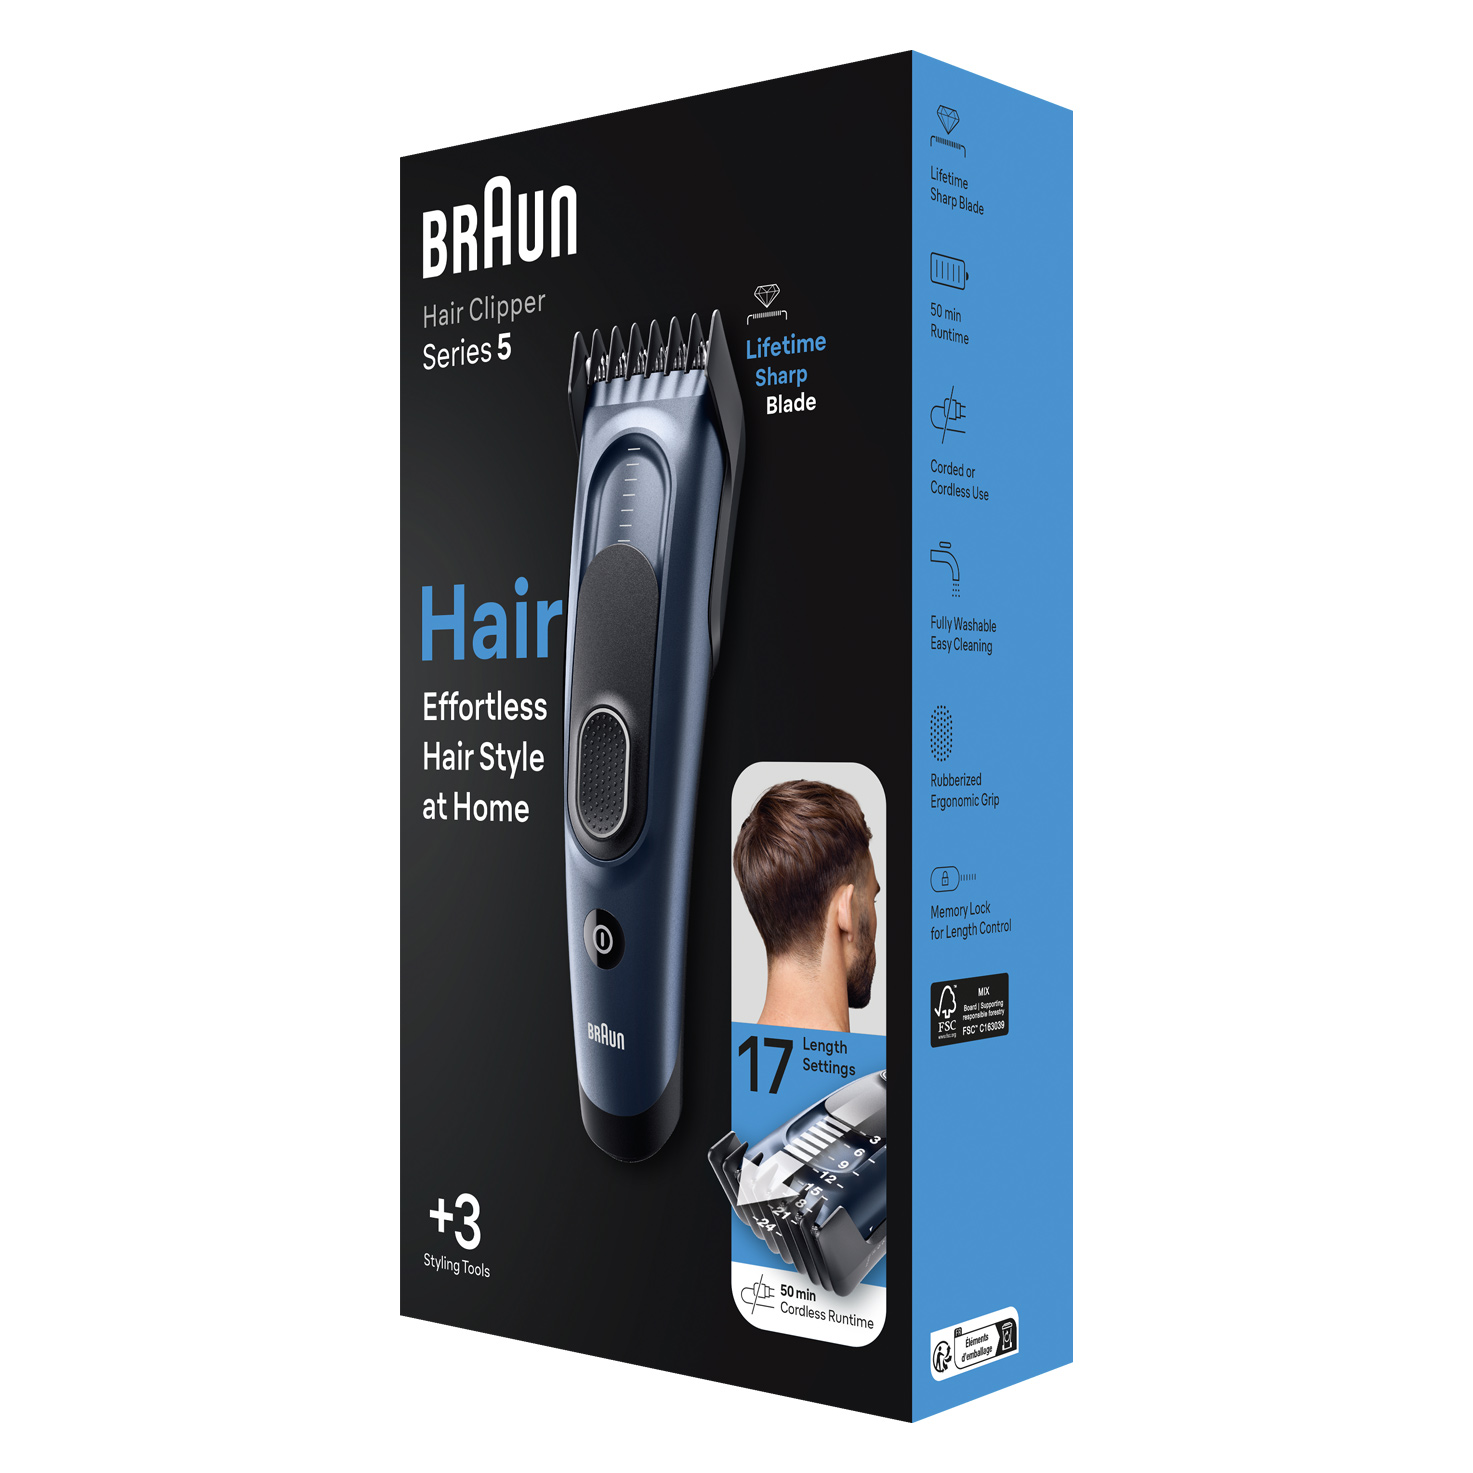 Hair Clippers - Electric hair trimmer for men | Braun Nordics